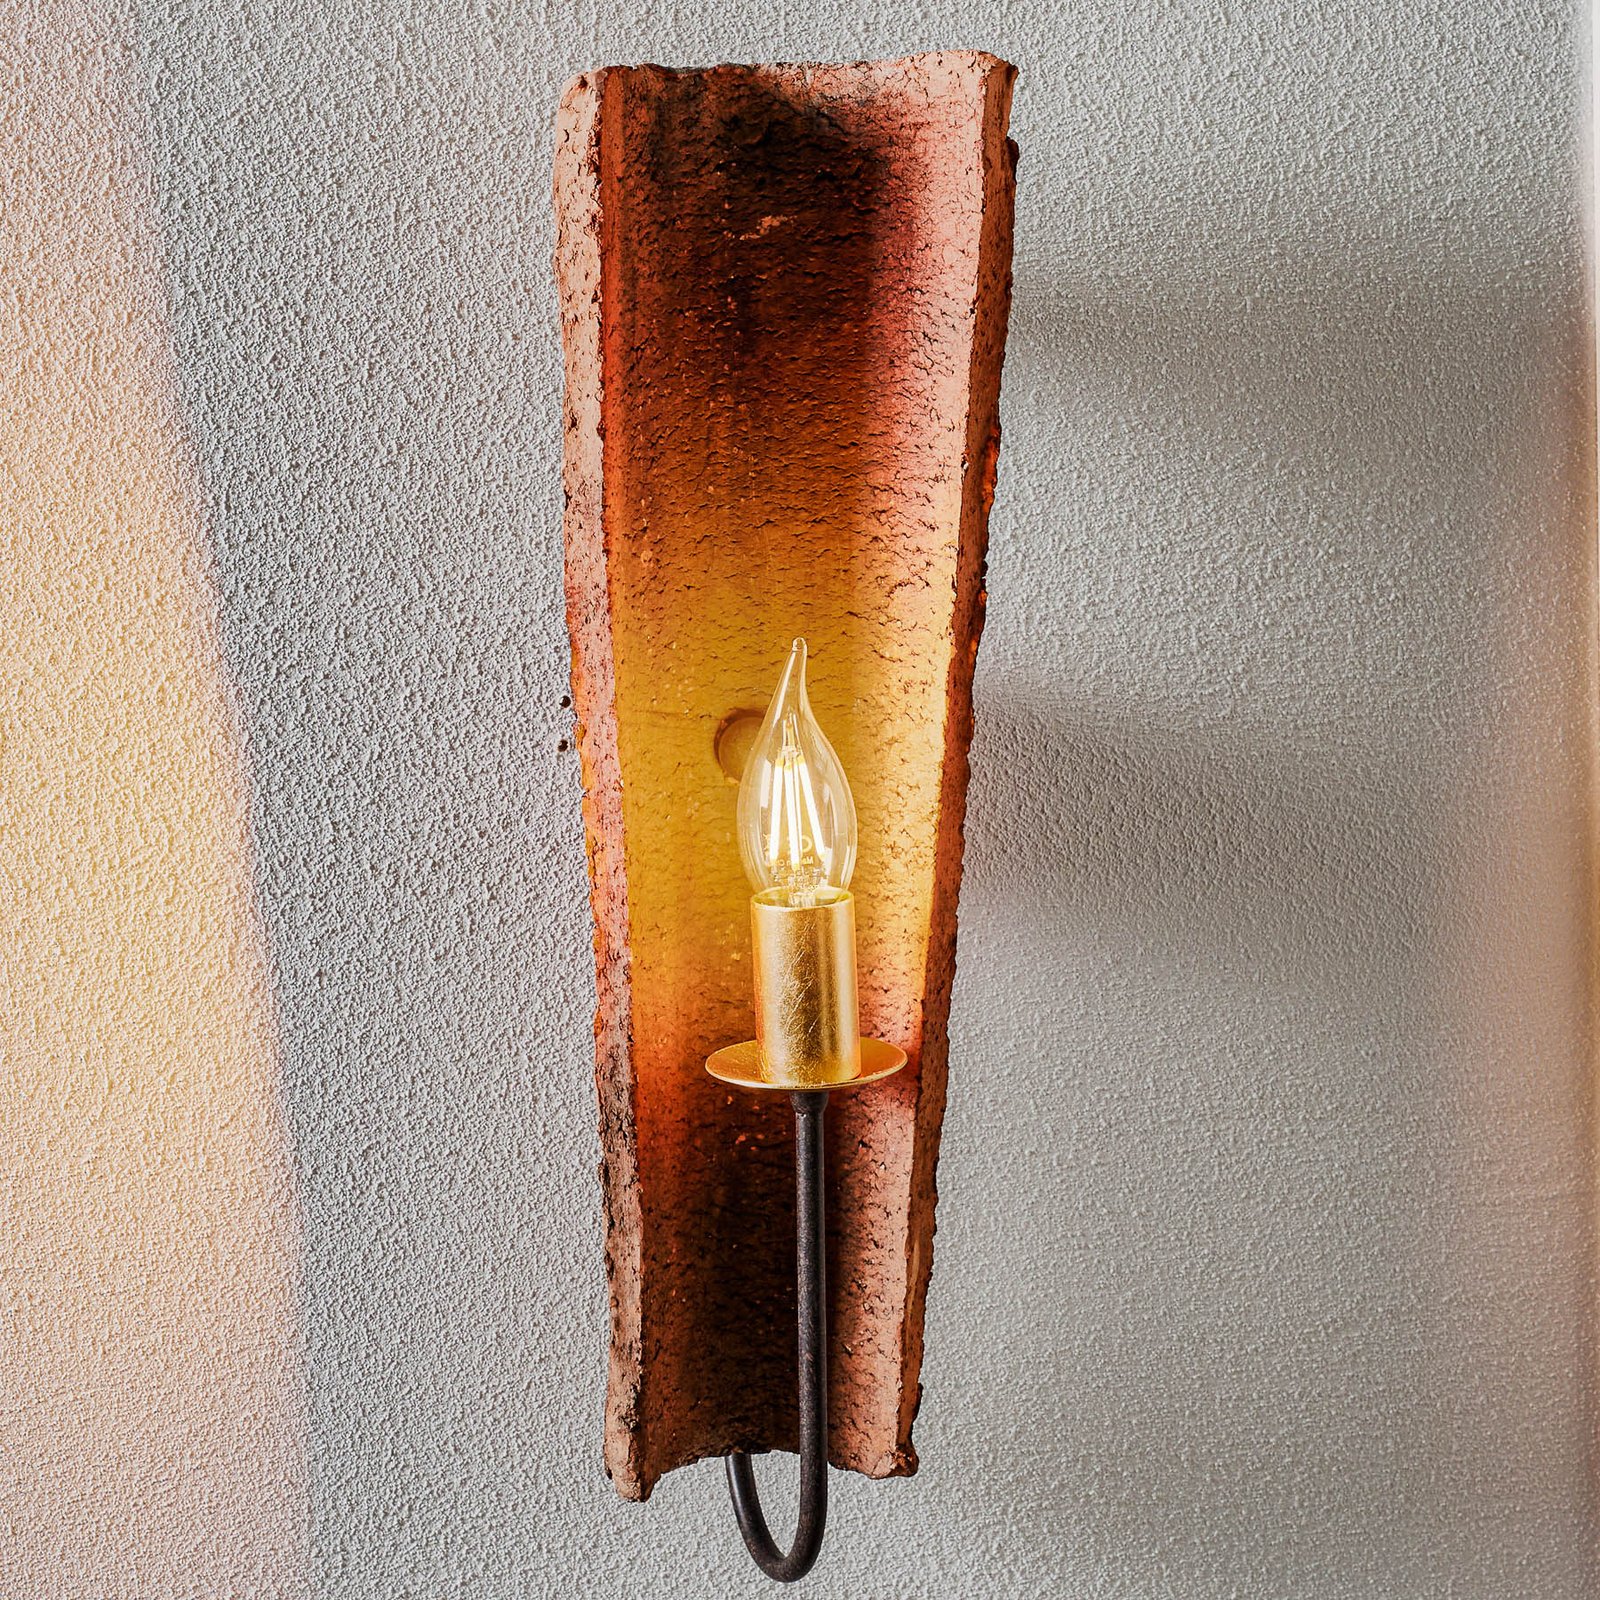 COUNTRY wall light with roof shingle